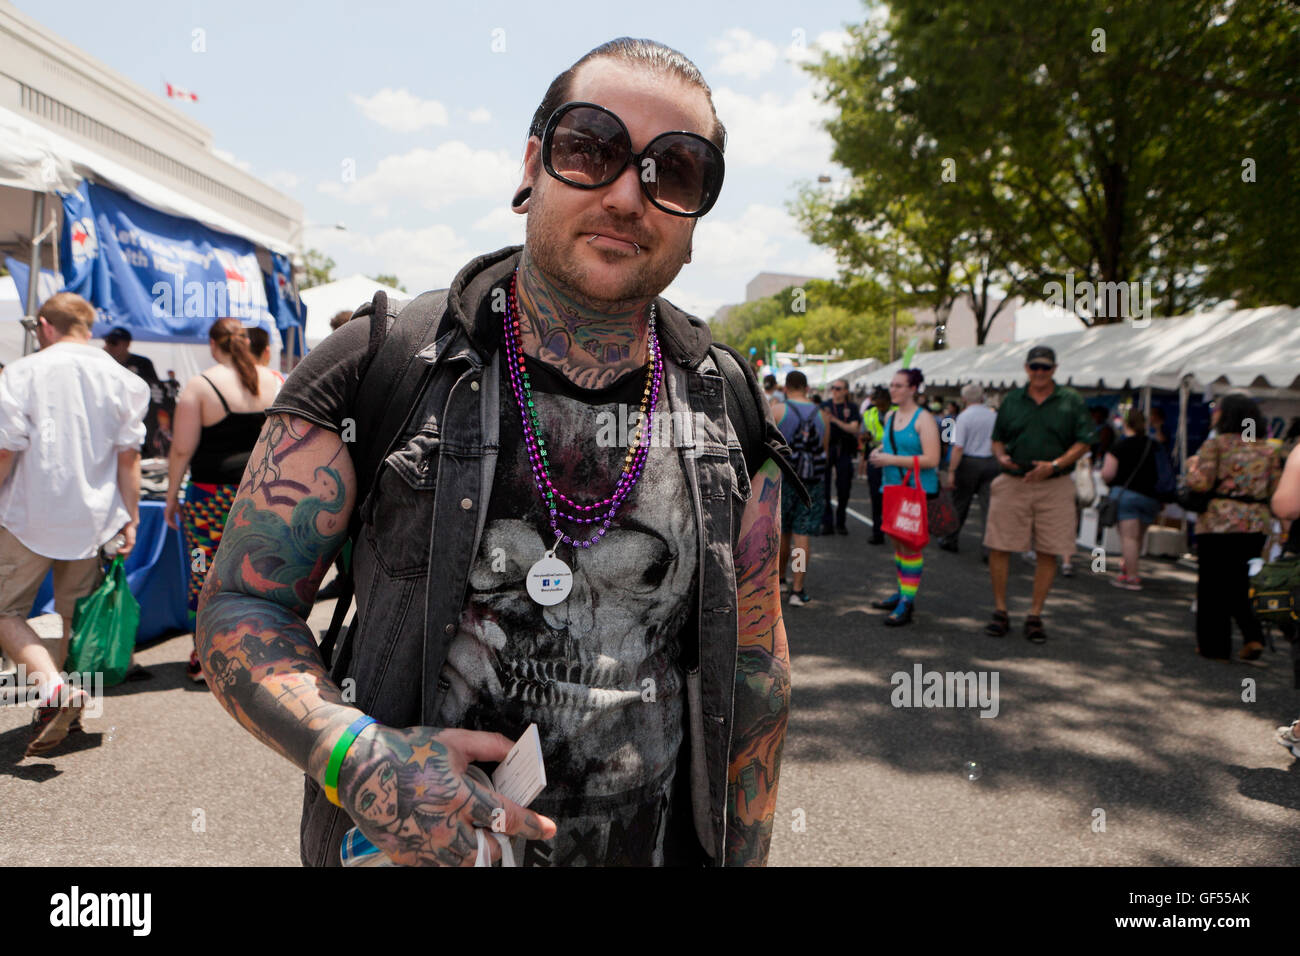 Man with many tattoos at an outdoor event - USA Stock Photo